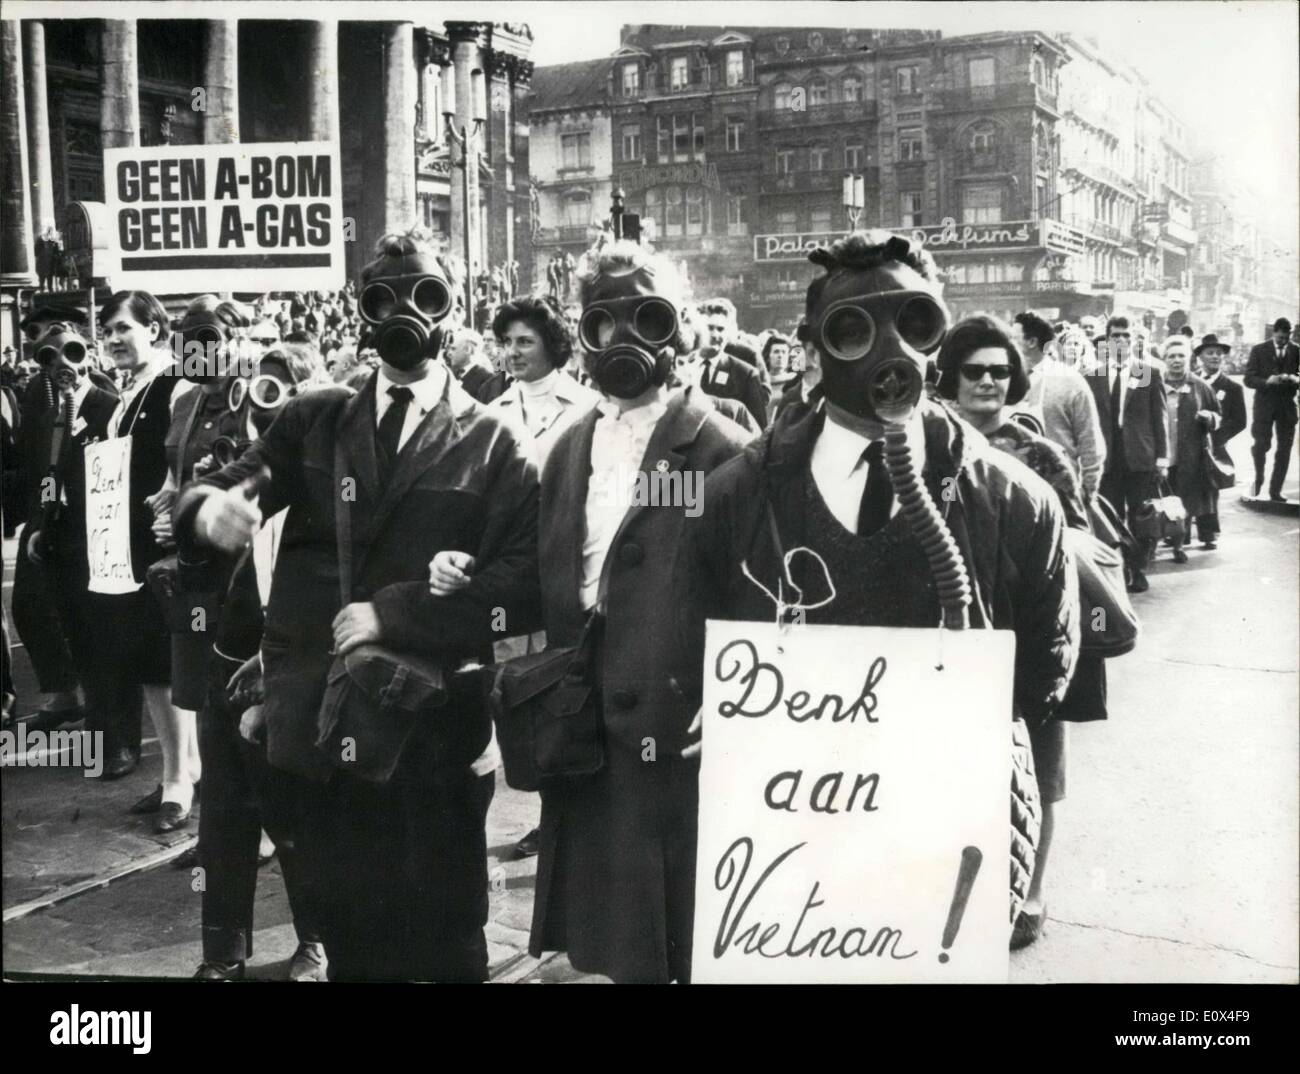 Mar. 29, 1965 - No To Atomic Bomb No To Gas: An Anti-war Demonstration was held in Brussels yesterday. Photo shows Demonstrators wearing gas masks and carrying a poster with the inscription: ''Think of Vietnam''. seen in the foreground a poster with the inscription: ''Bean the A-Bom, Ban Gas! Stock Photo